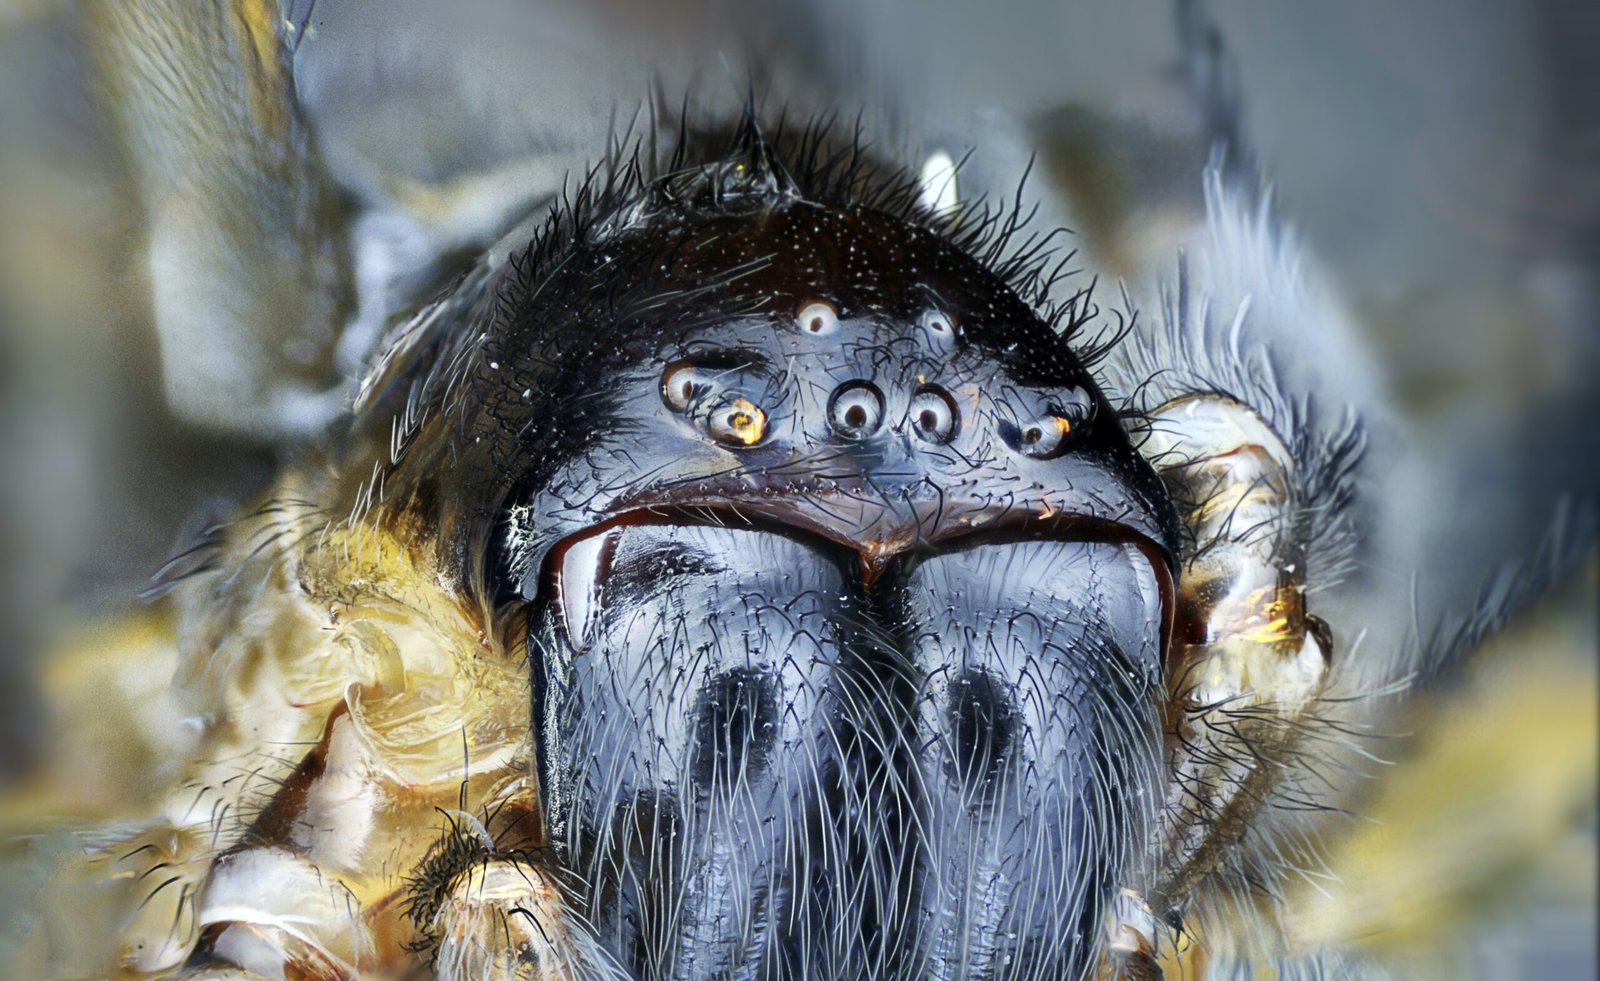 How Do Tarantulas Defend Against Threats From Other Spider Species During Territory Marking?